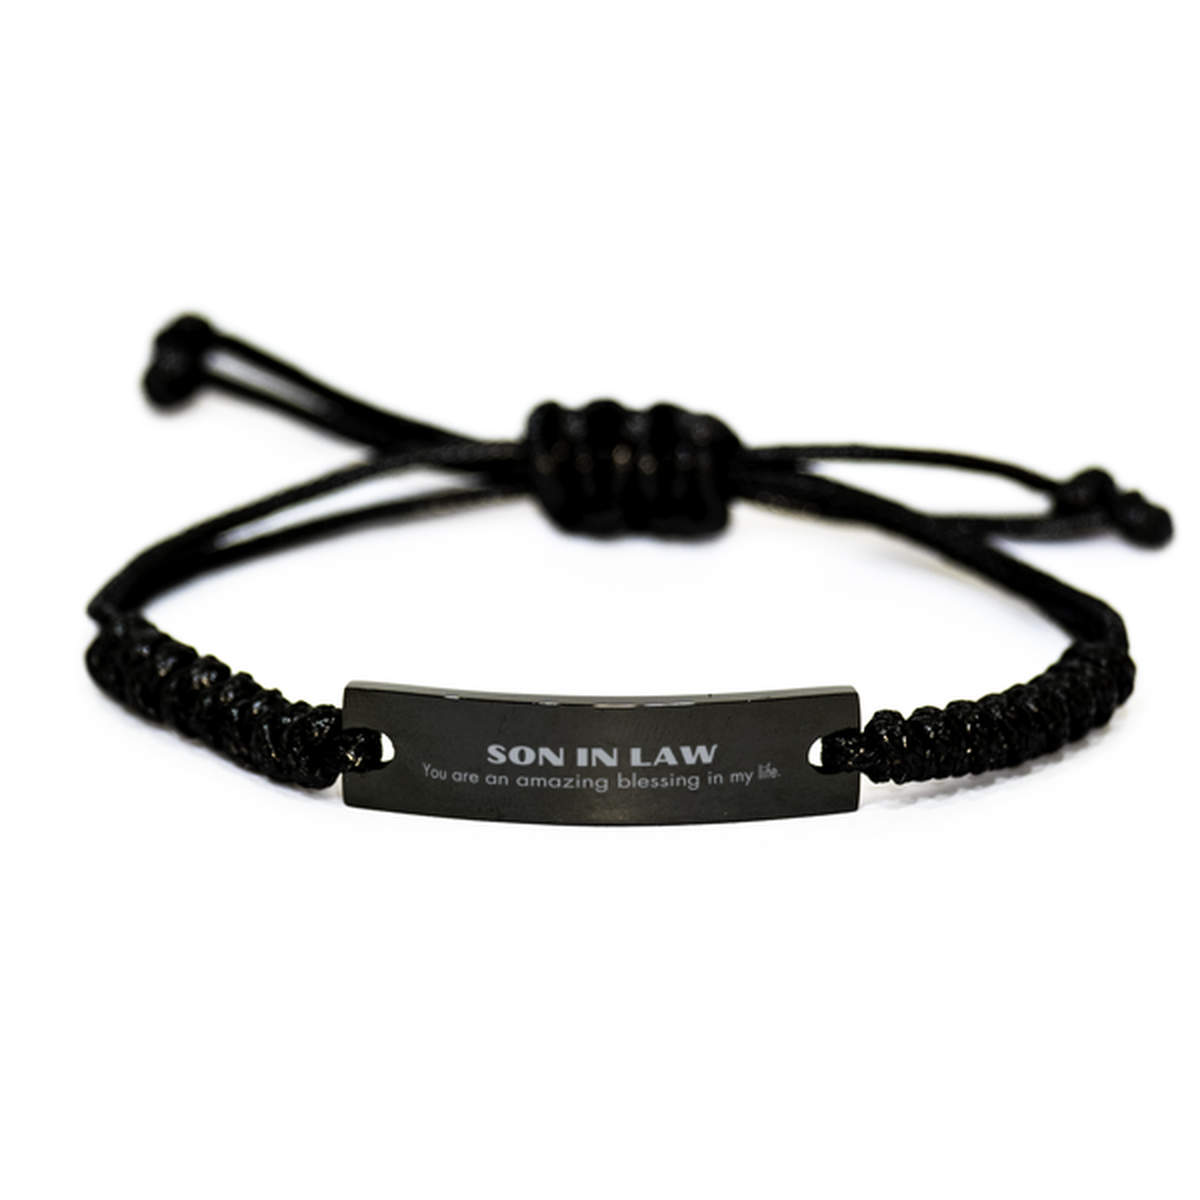 Son In Law Black Rope Bracelet, You are an amazing blessing in my life, Thank You Gifts For Son In Law, Inspirational Birthday Christmas Unique Gifts For Son In Law